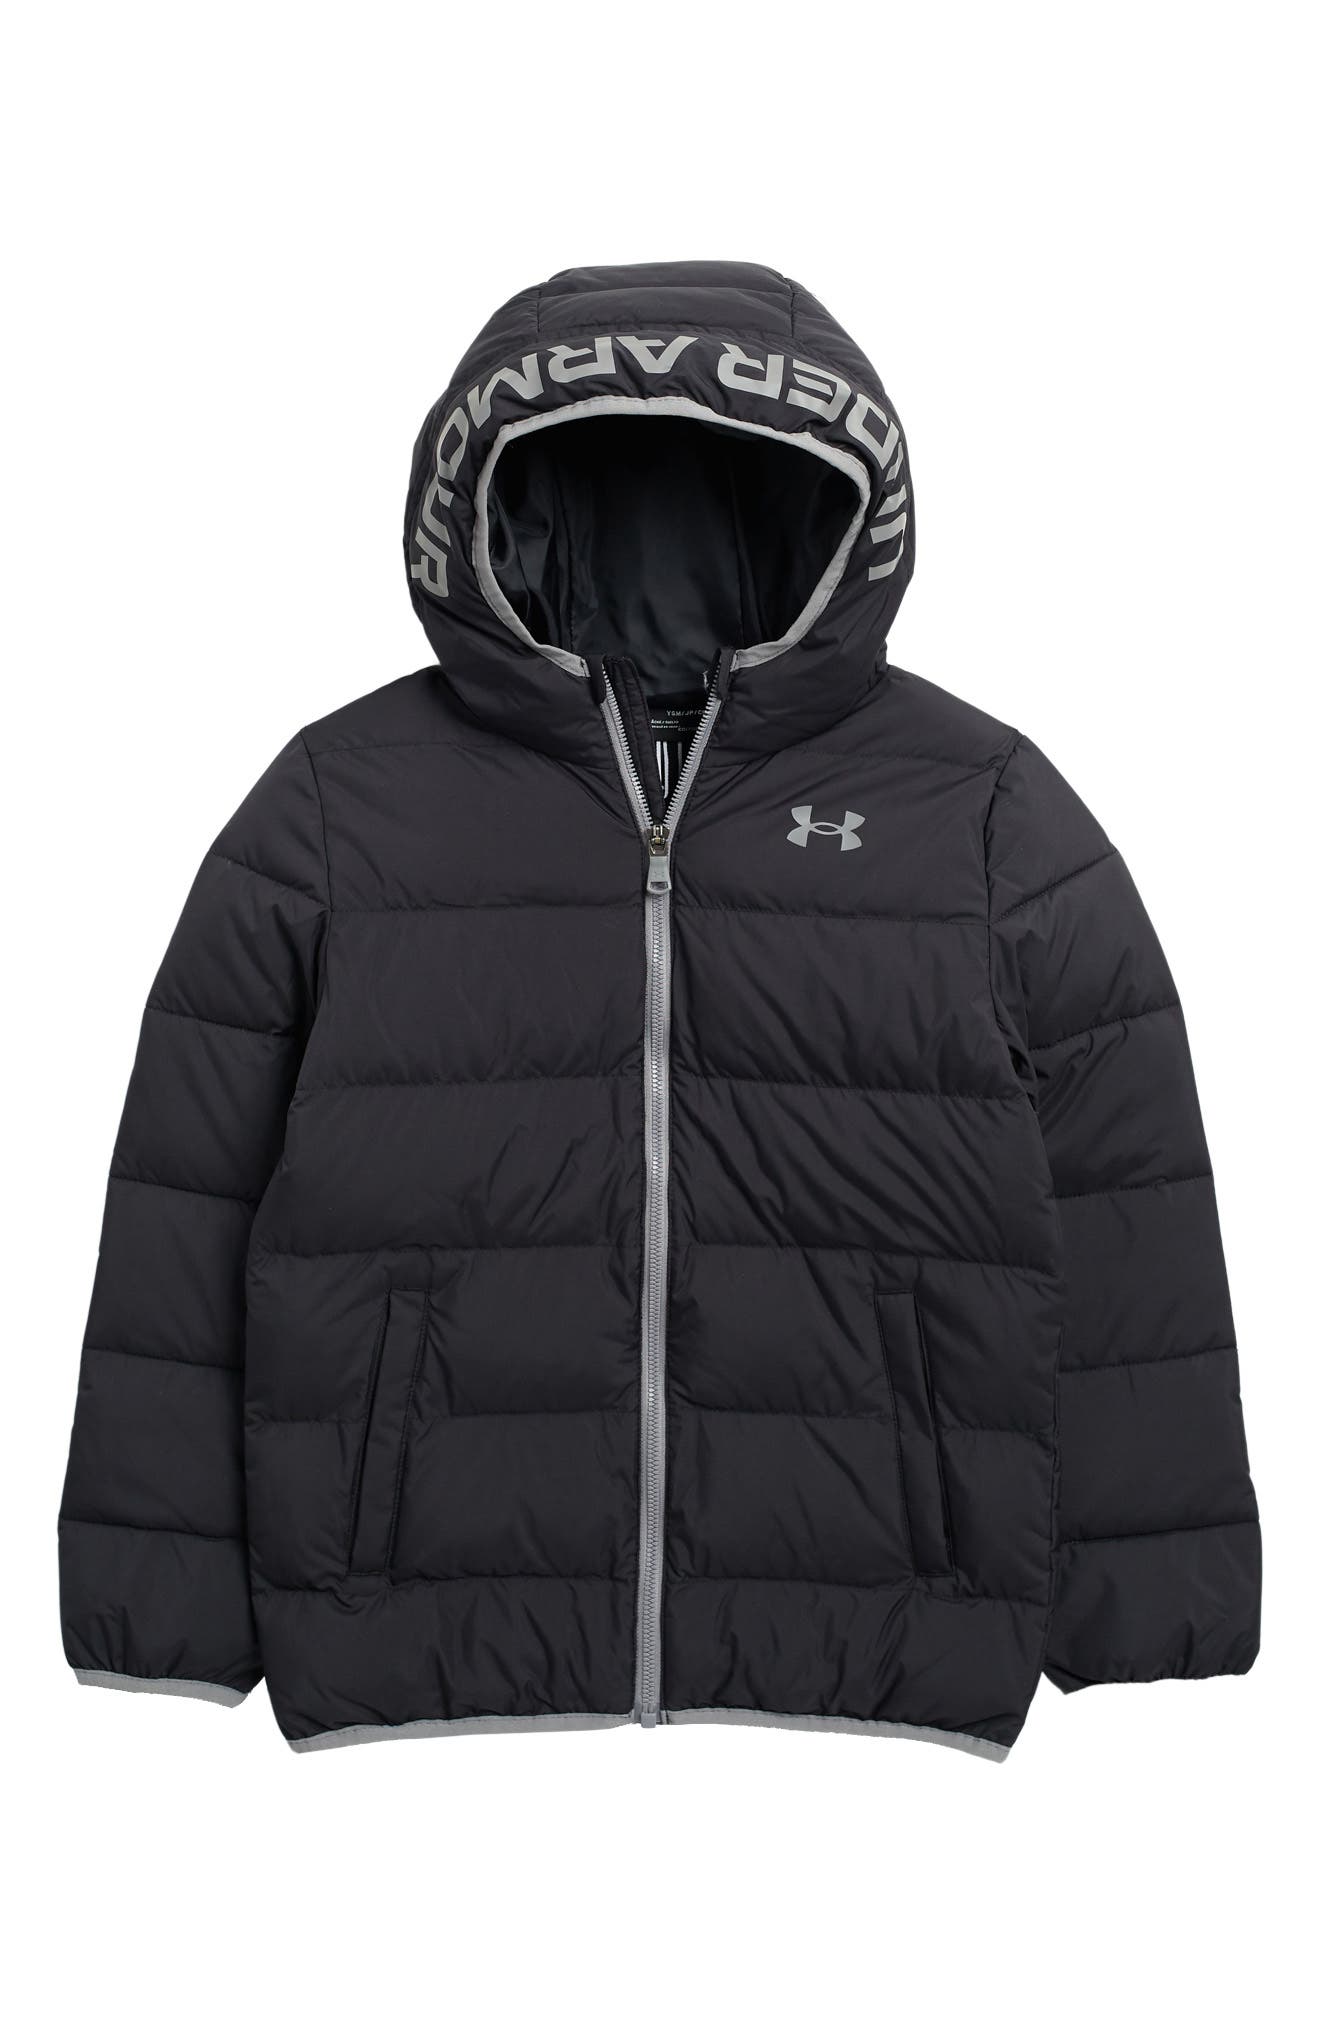 UNDER ARMOUR Pronto Puffer Jacket 